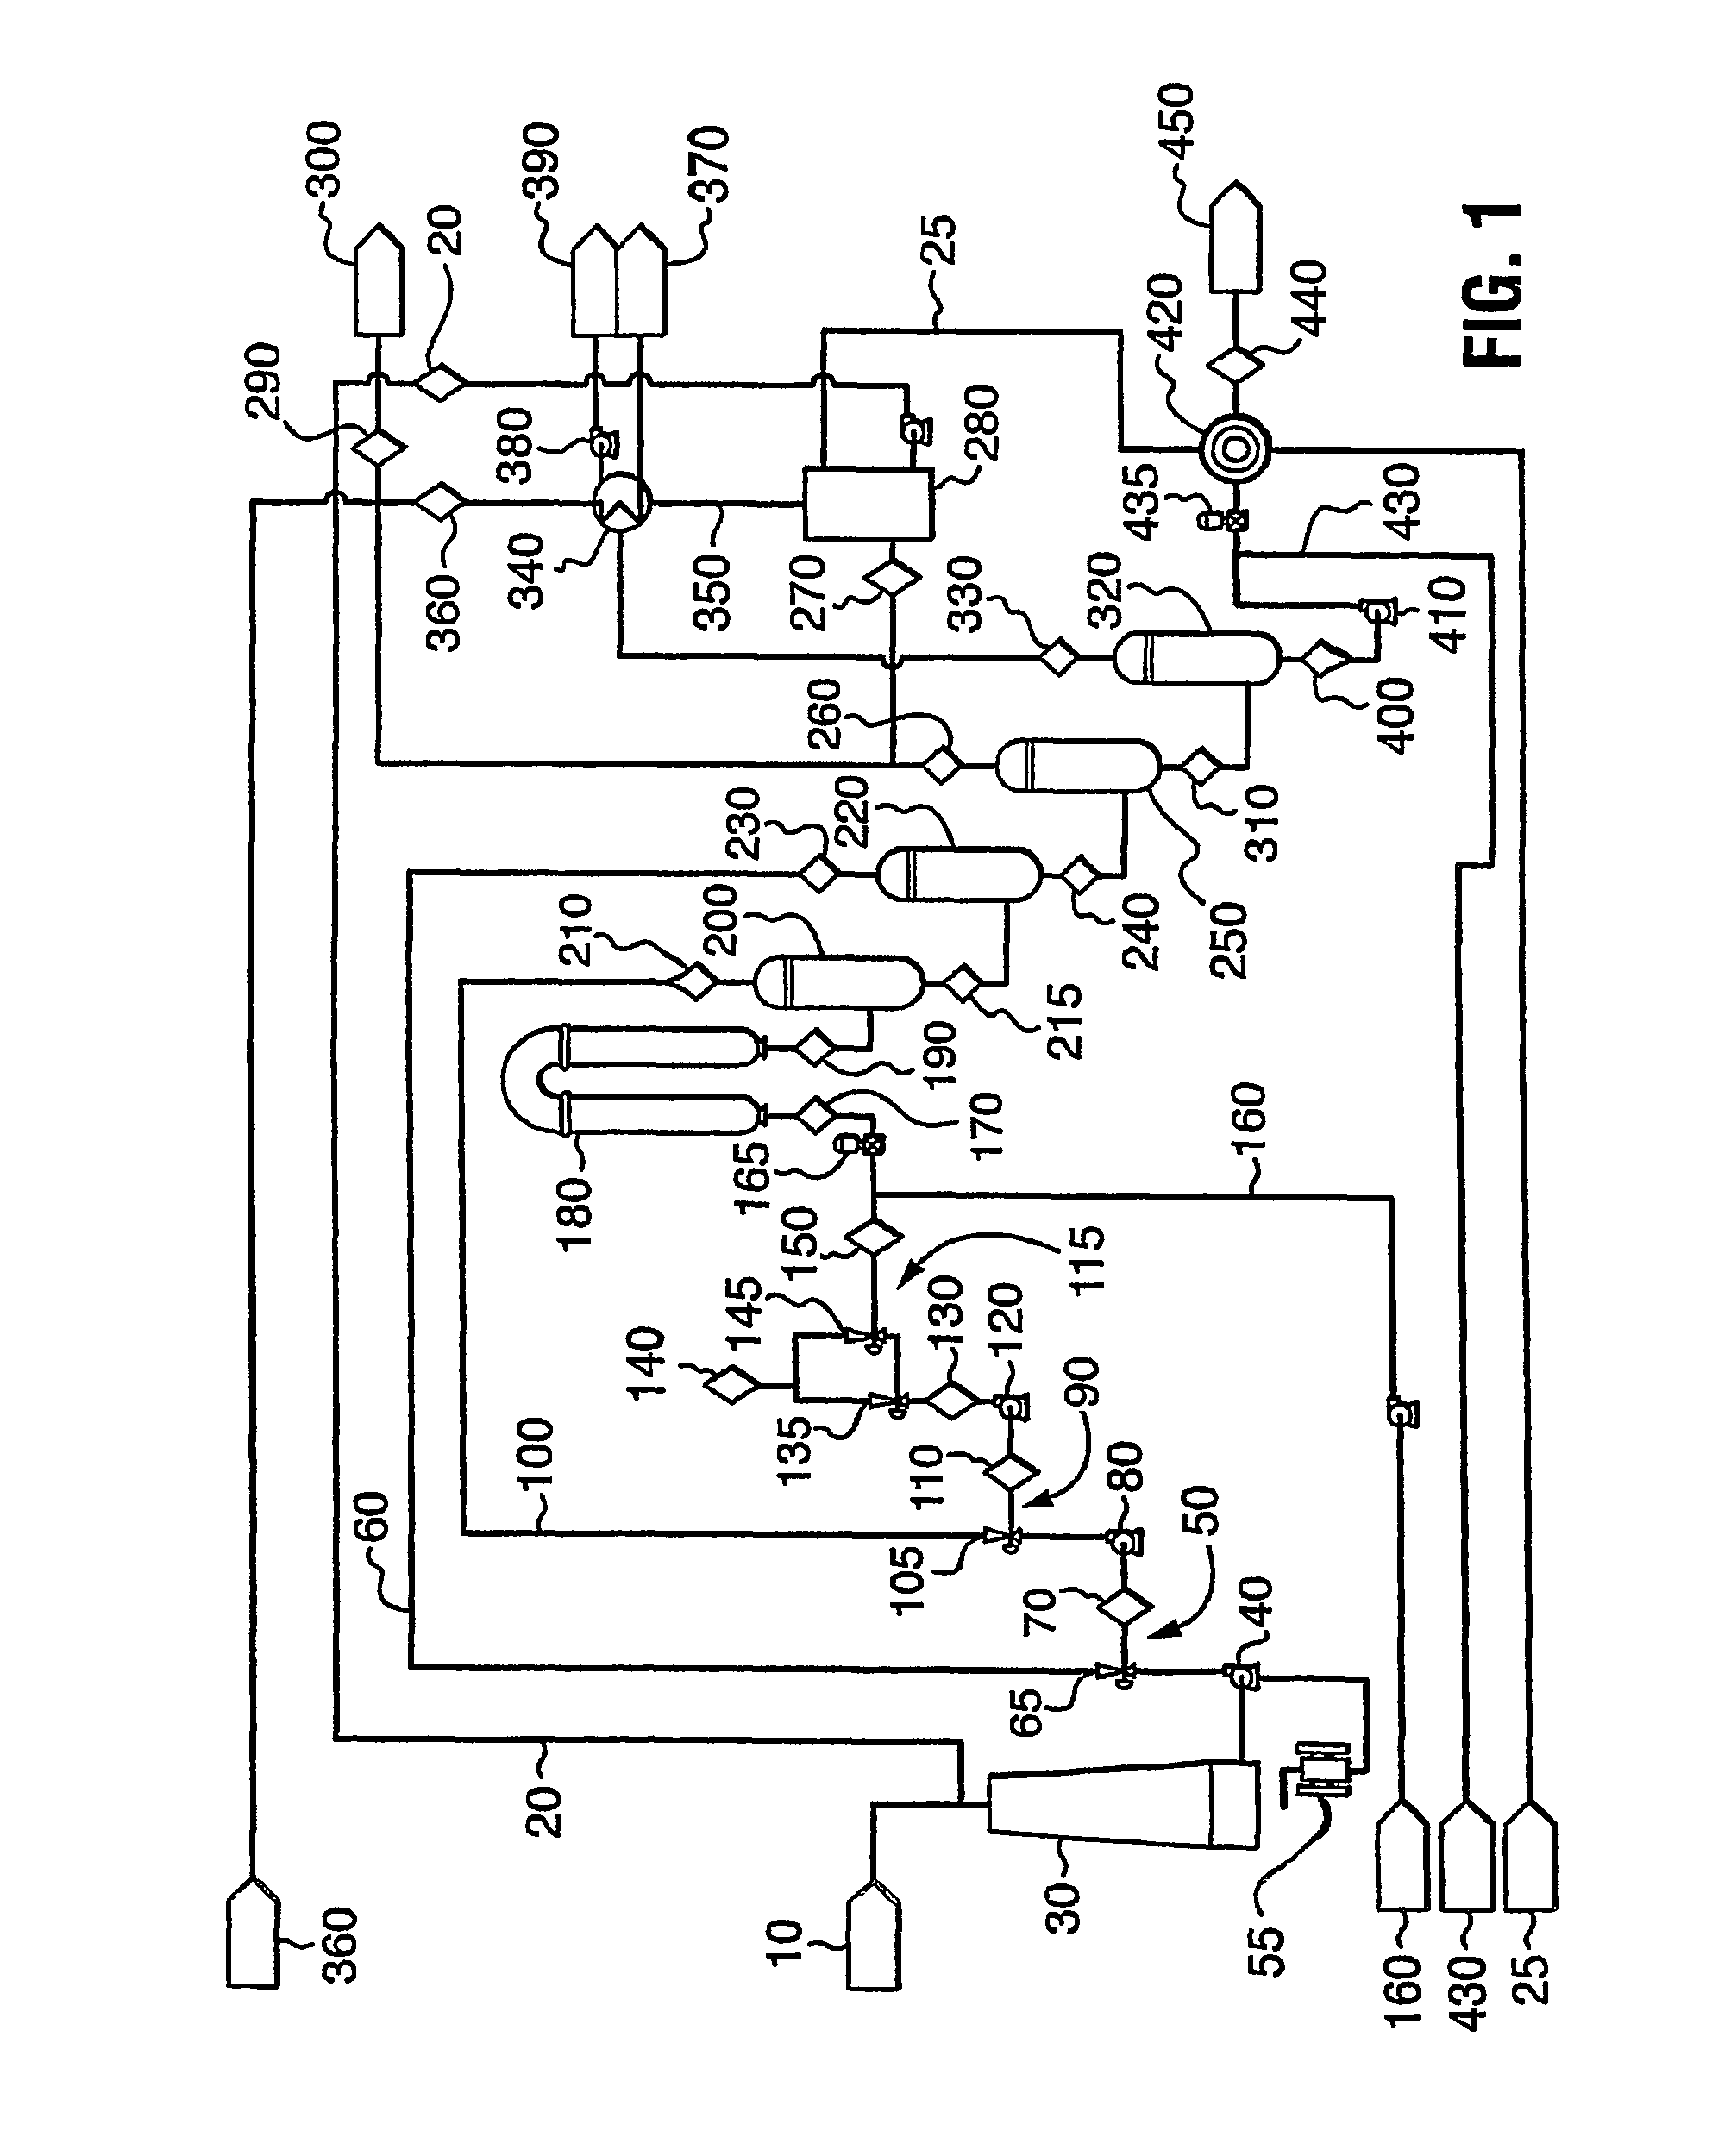 Continuous flowing pre-treatment system with steam recovery